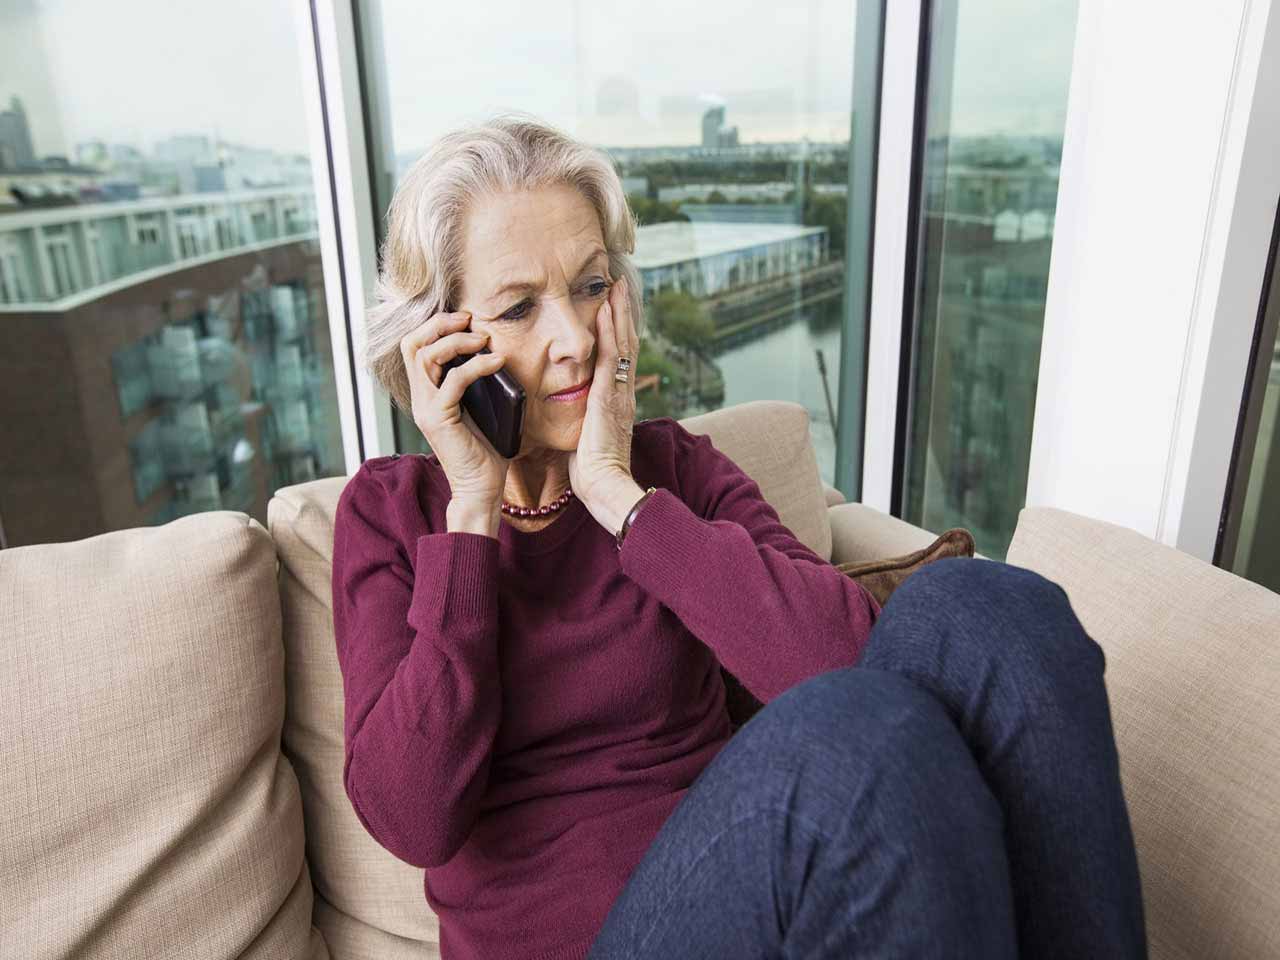 A mature woman receiving a nuisance phone call